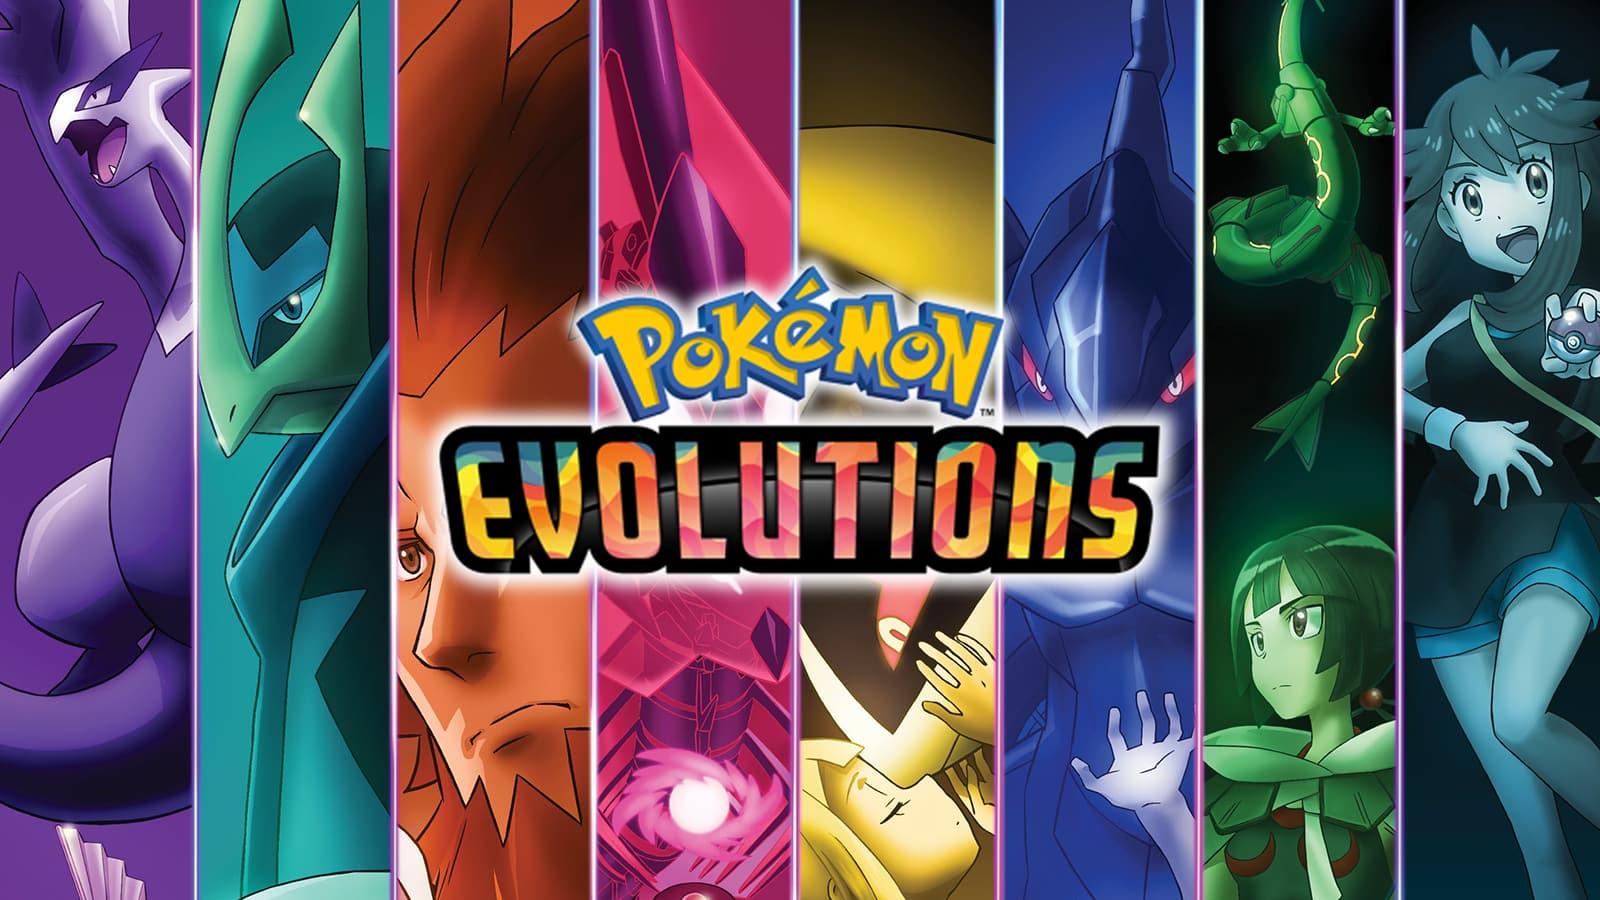 Pokemon Evolutions Anime Series Being Made by OLM Studios